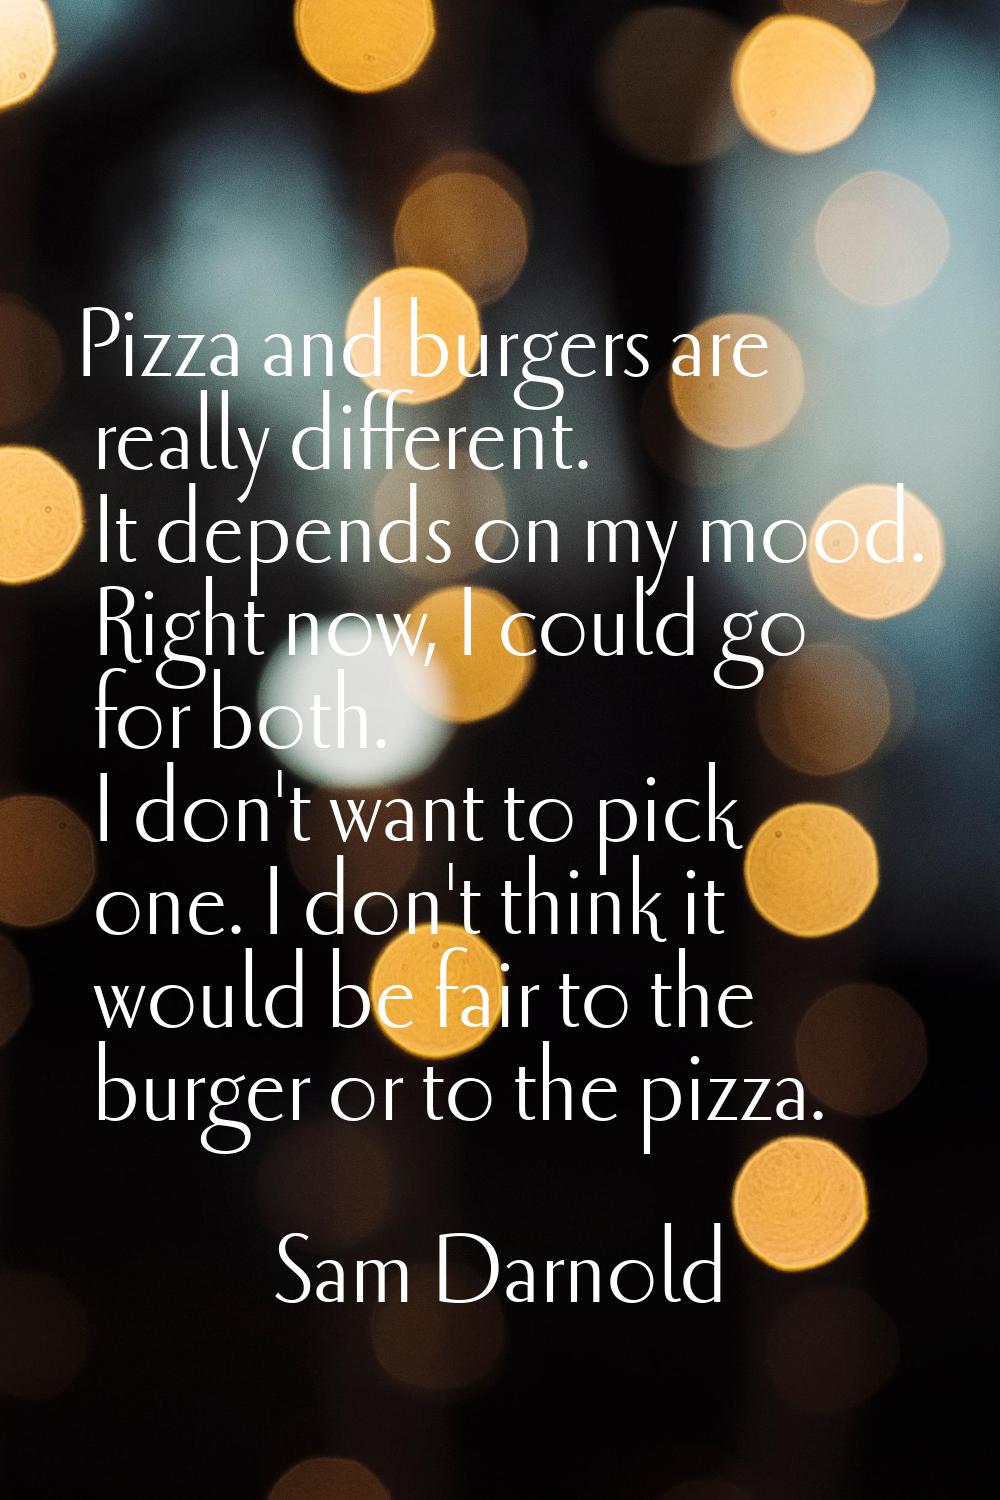 Pizza and burgers are really different. It depends on my mood. Right now, I could go for both. I do